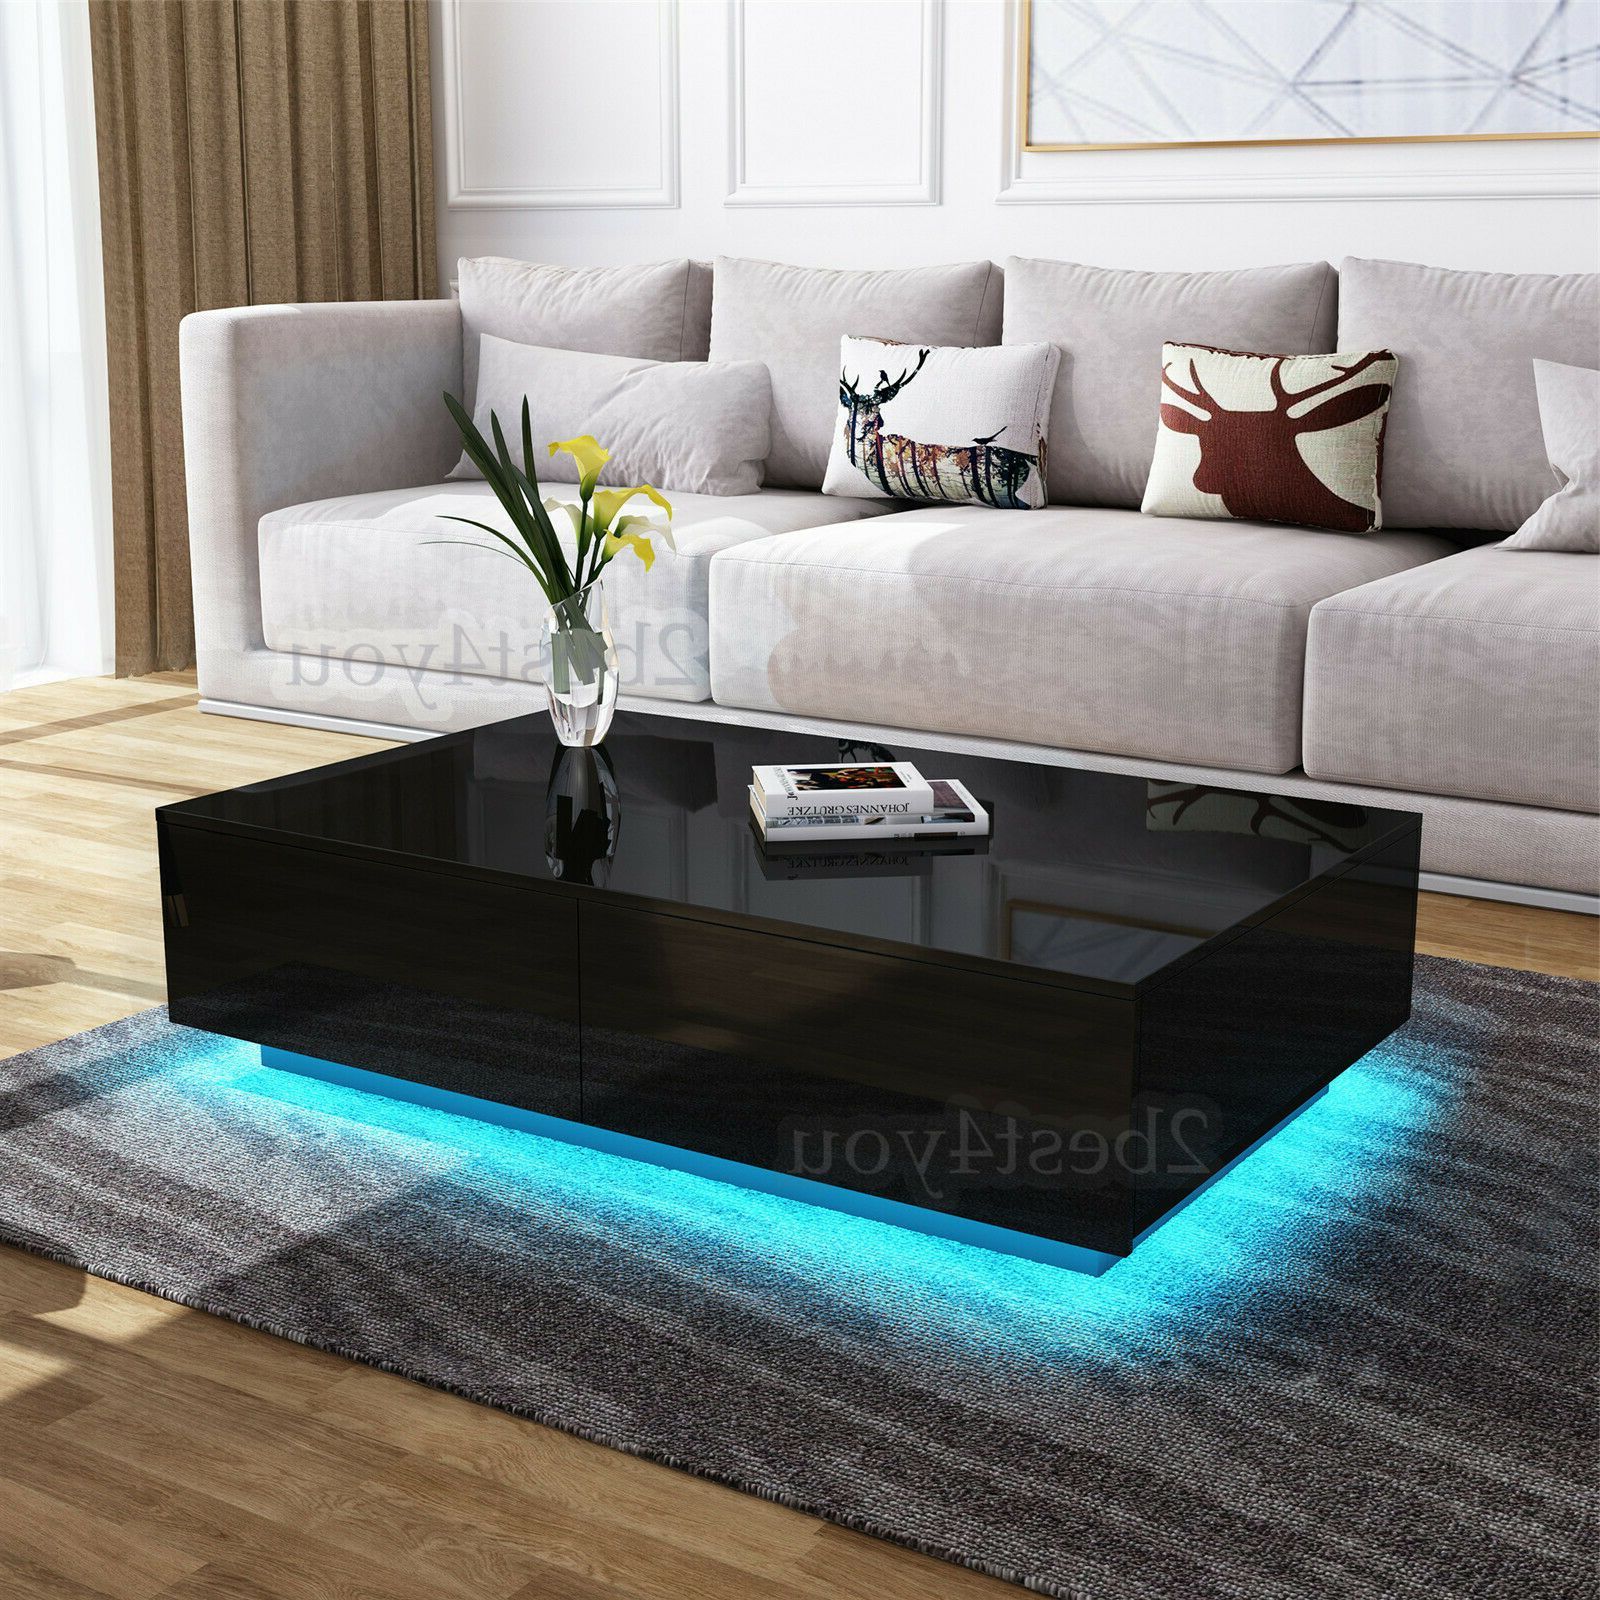 Most Recent Modern Coffee Table With Led Lights – Stellabracy With Regard To Coffee Tables With Led Lights (View 11 of 15)